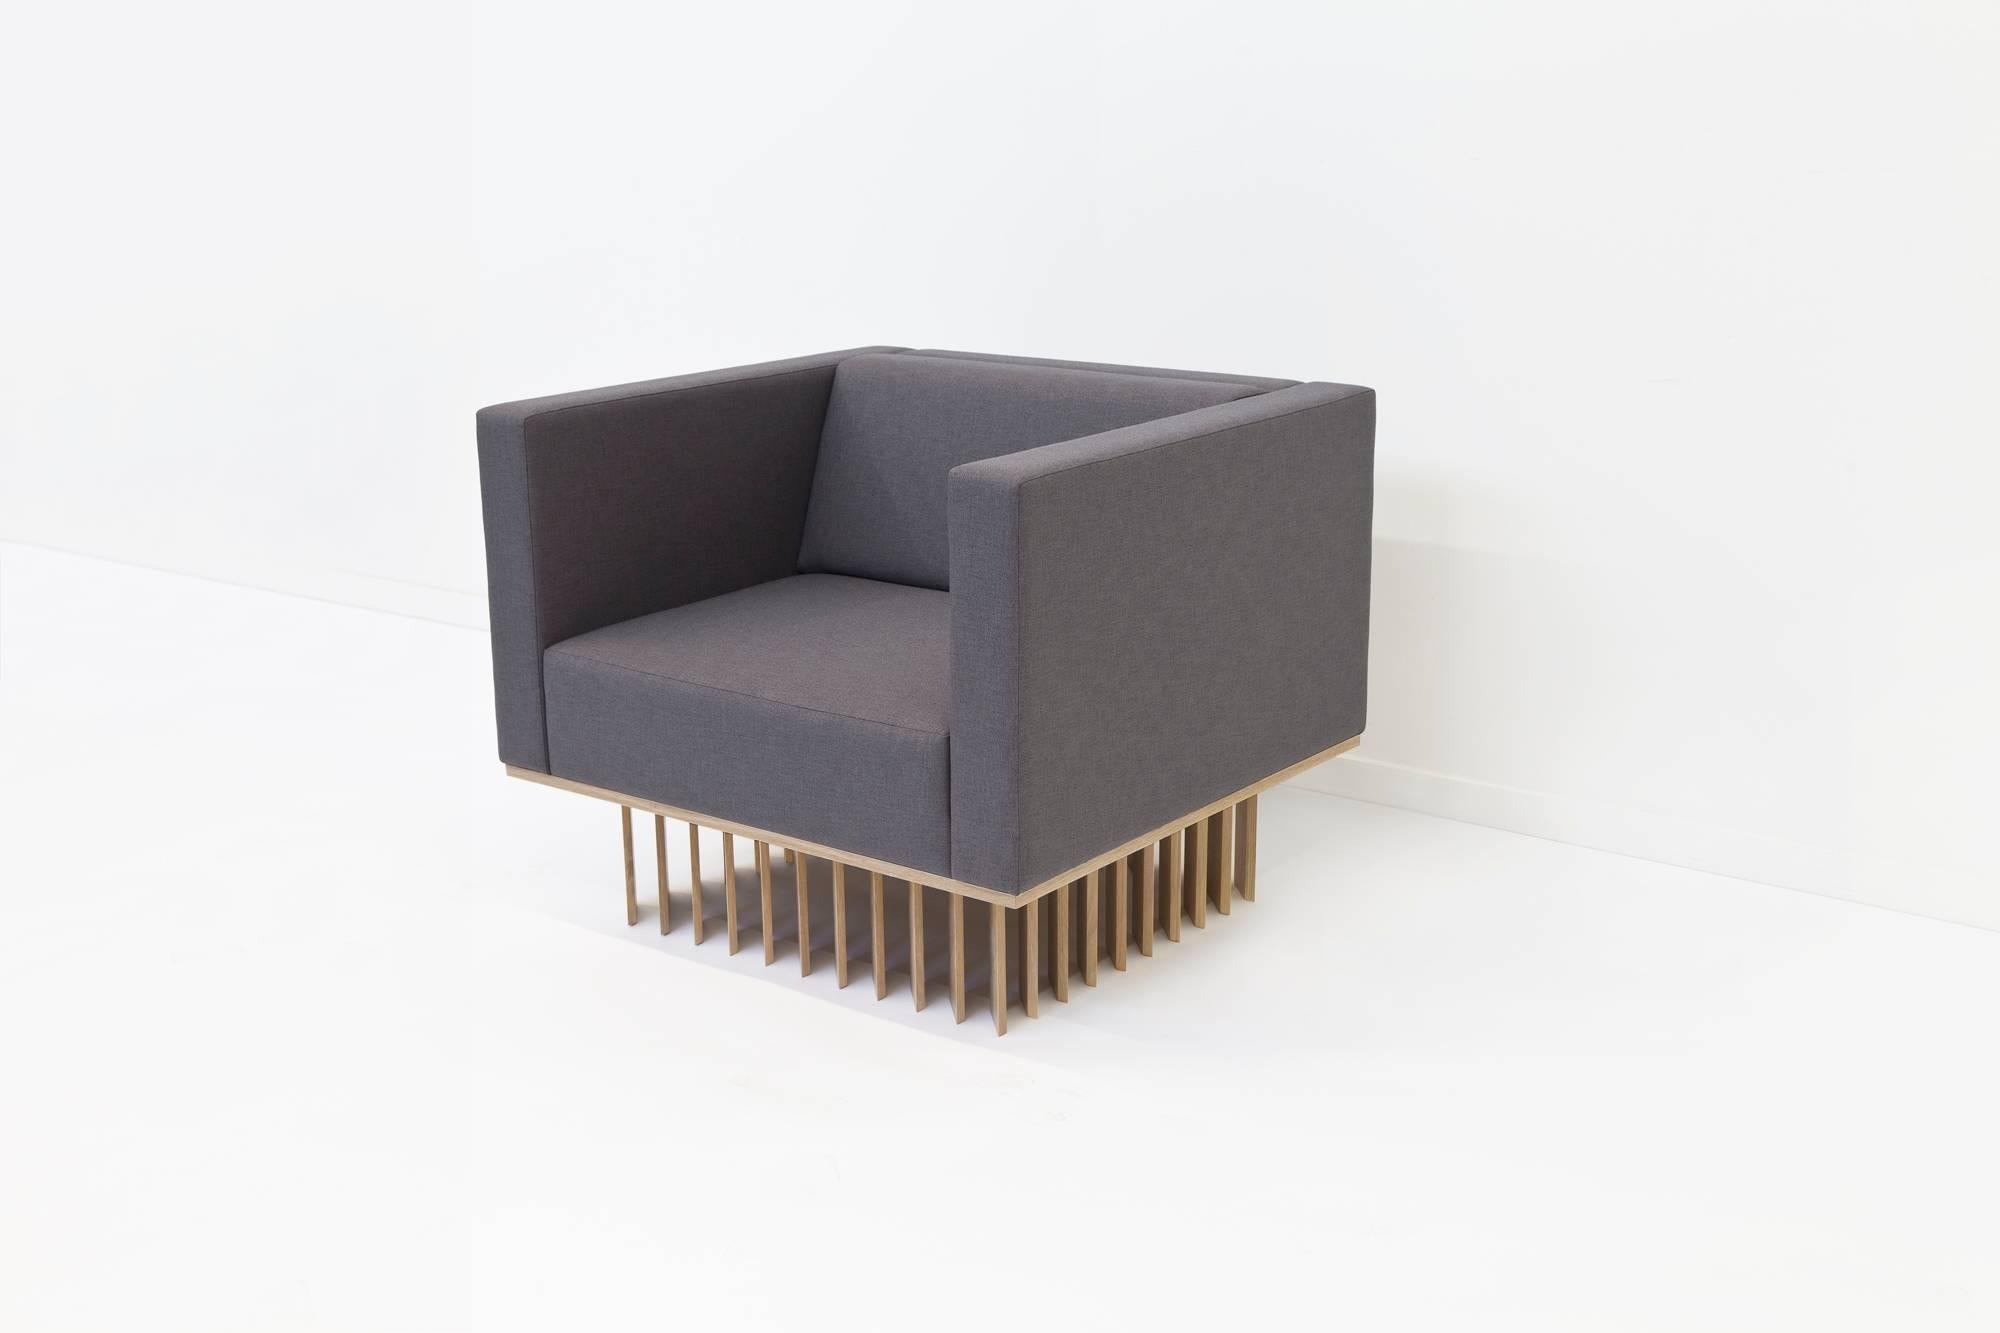 Not So General Gallery in Los Angeles is proud to present tthe Angled Wood Bar Lounger / Lounge Chair from design studio Early Work which is the perfect accompaniment to their Angled Wood Bar Sofa. 

Plushly upholstered in manner by Maharam, the